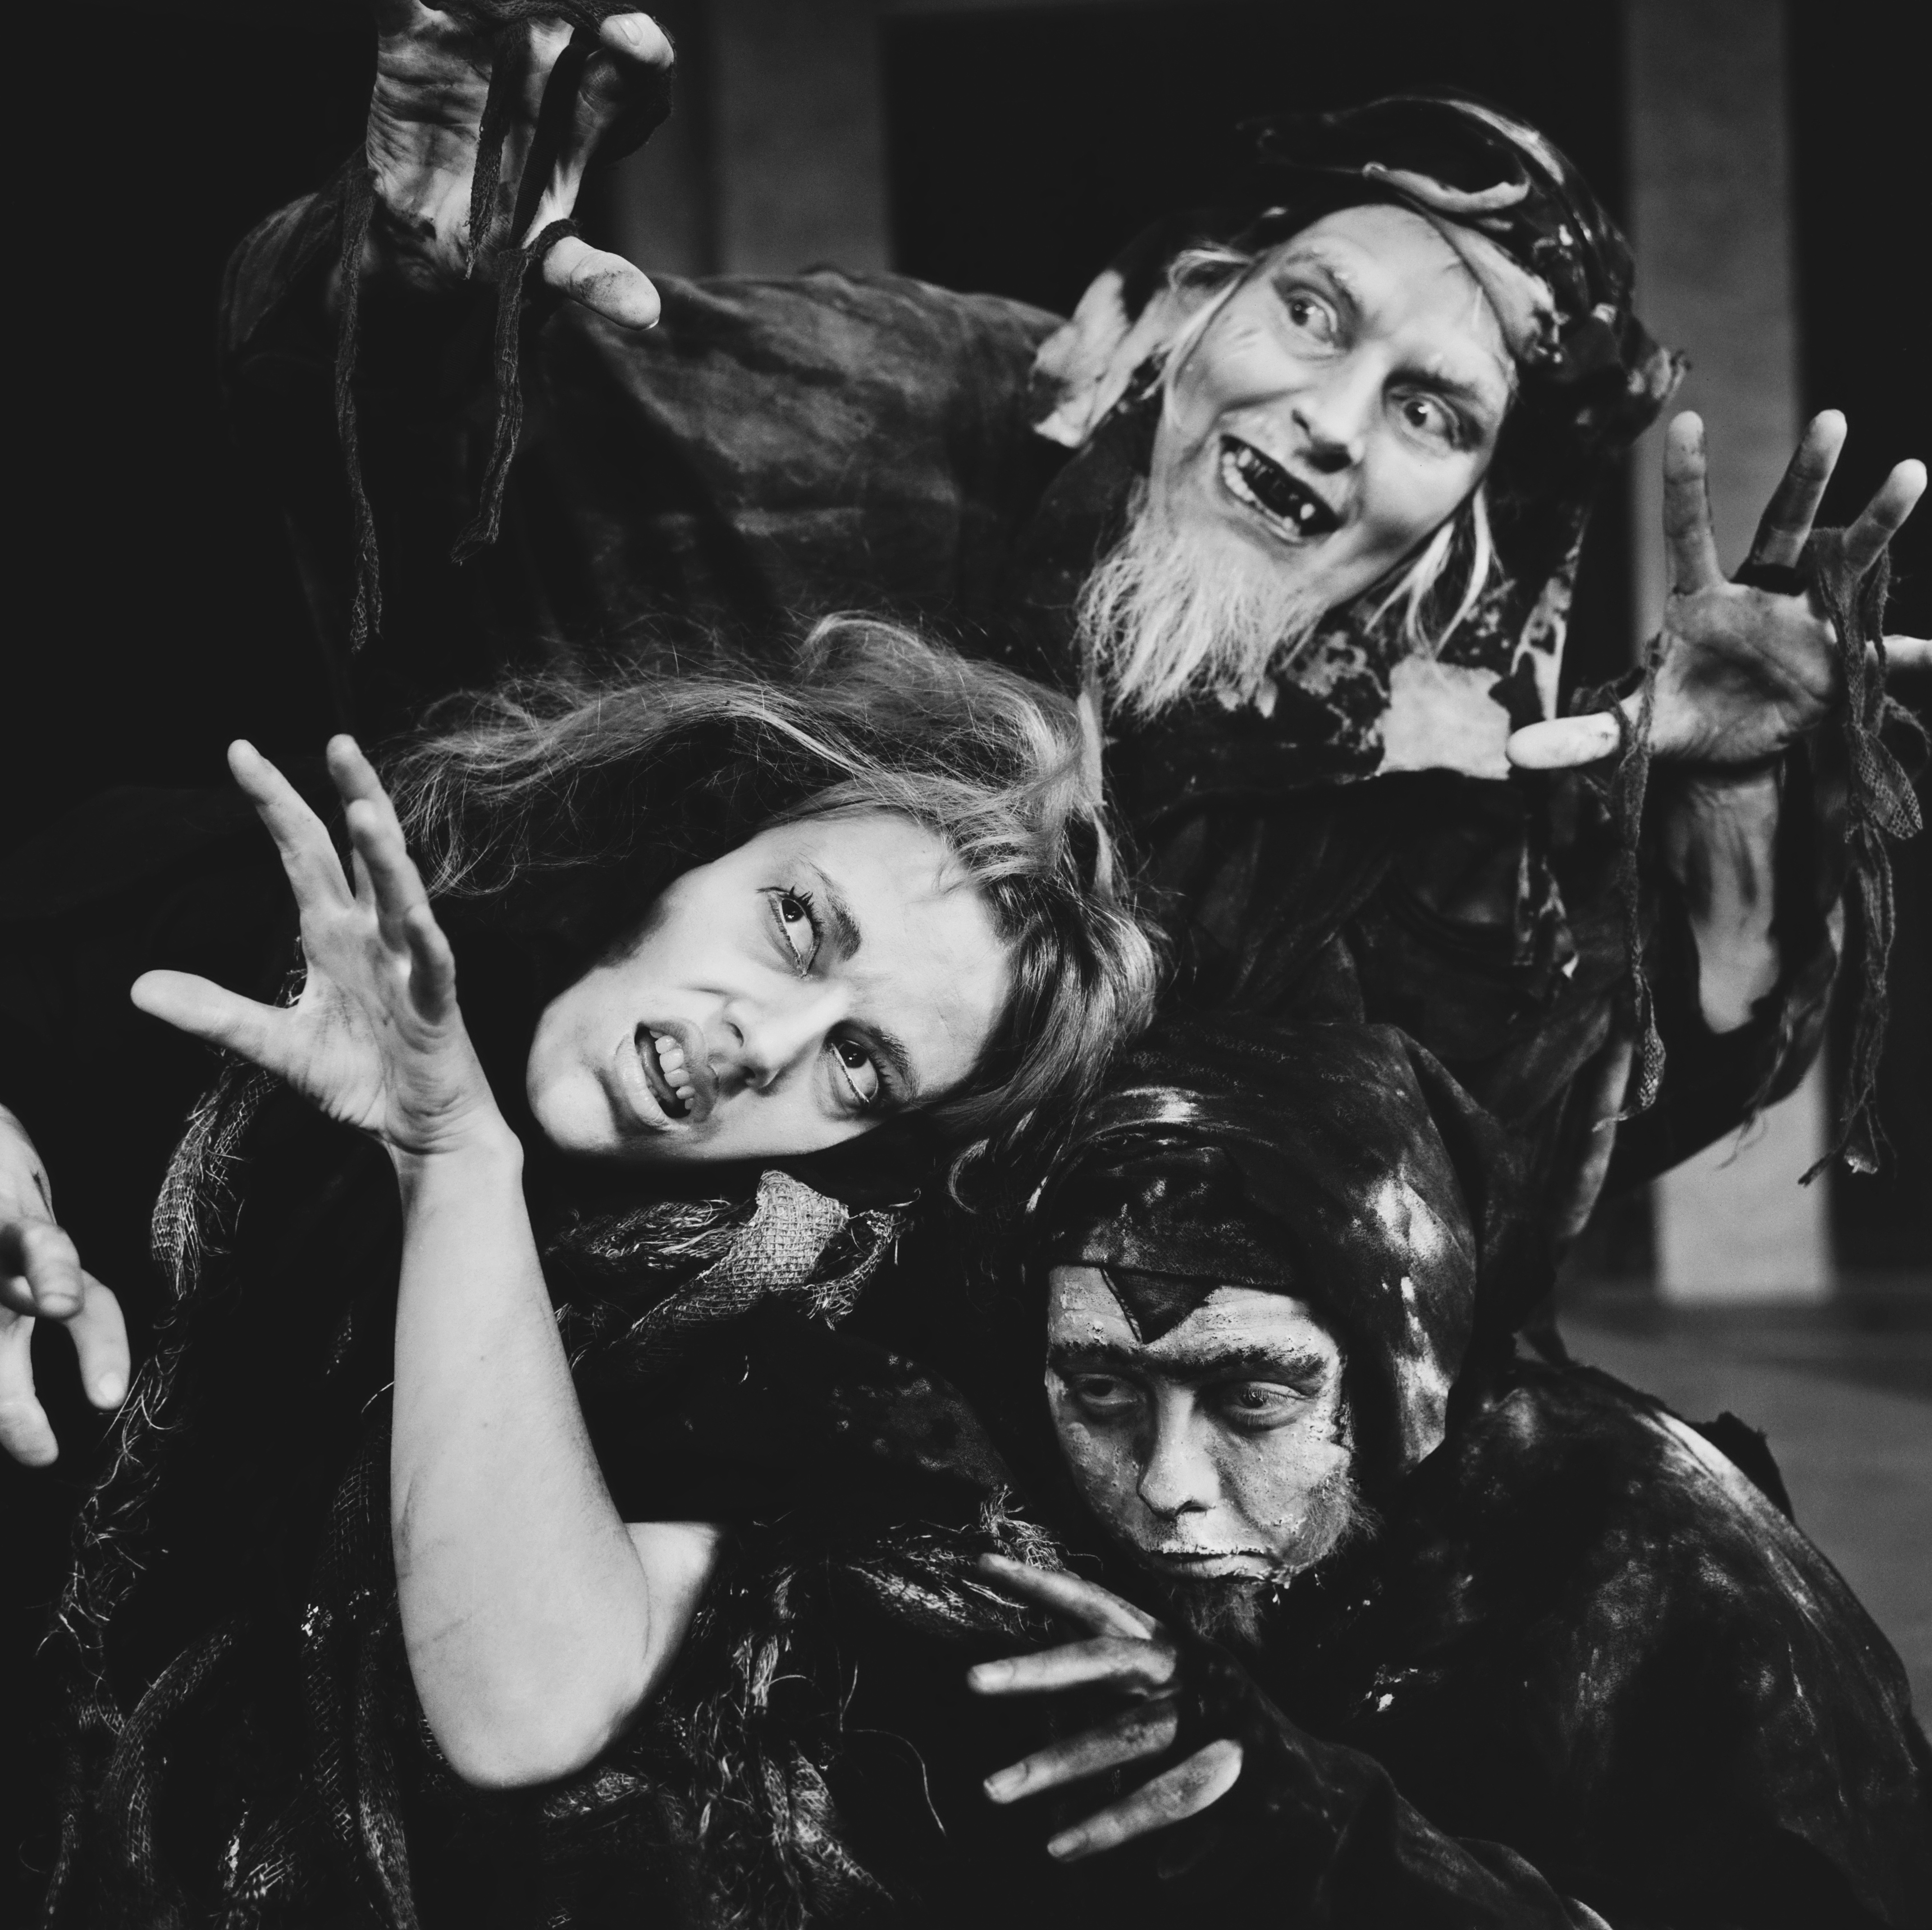 British actresses Coral Atkins, Dennis Coffey and Hilda Fenemore as the three witches starring in the play 'Macbeth' at the Mermaid Theatre, London, UK, 21st April 1964. (Photo by Larry Ellis/Daily Express/Hulton Archive/Getty Images)